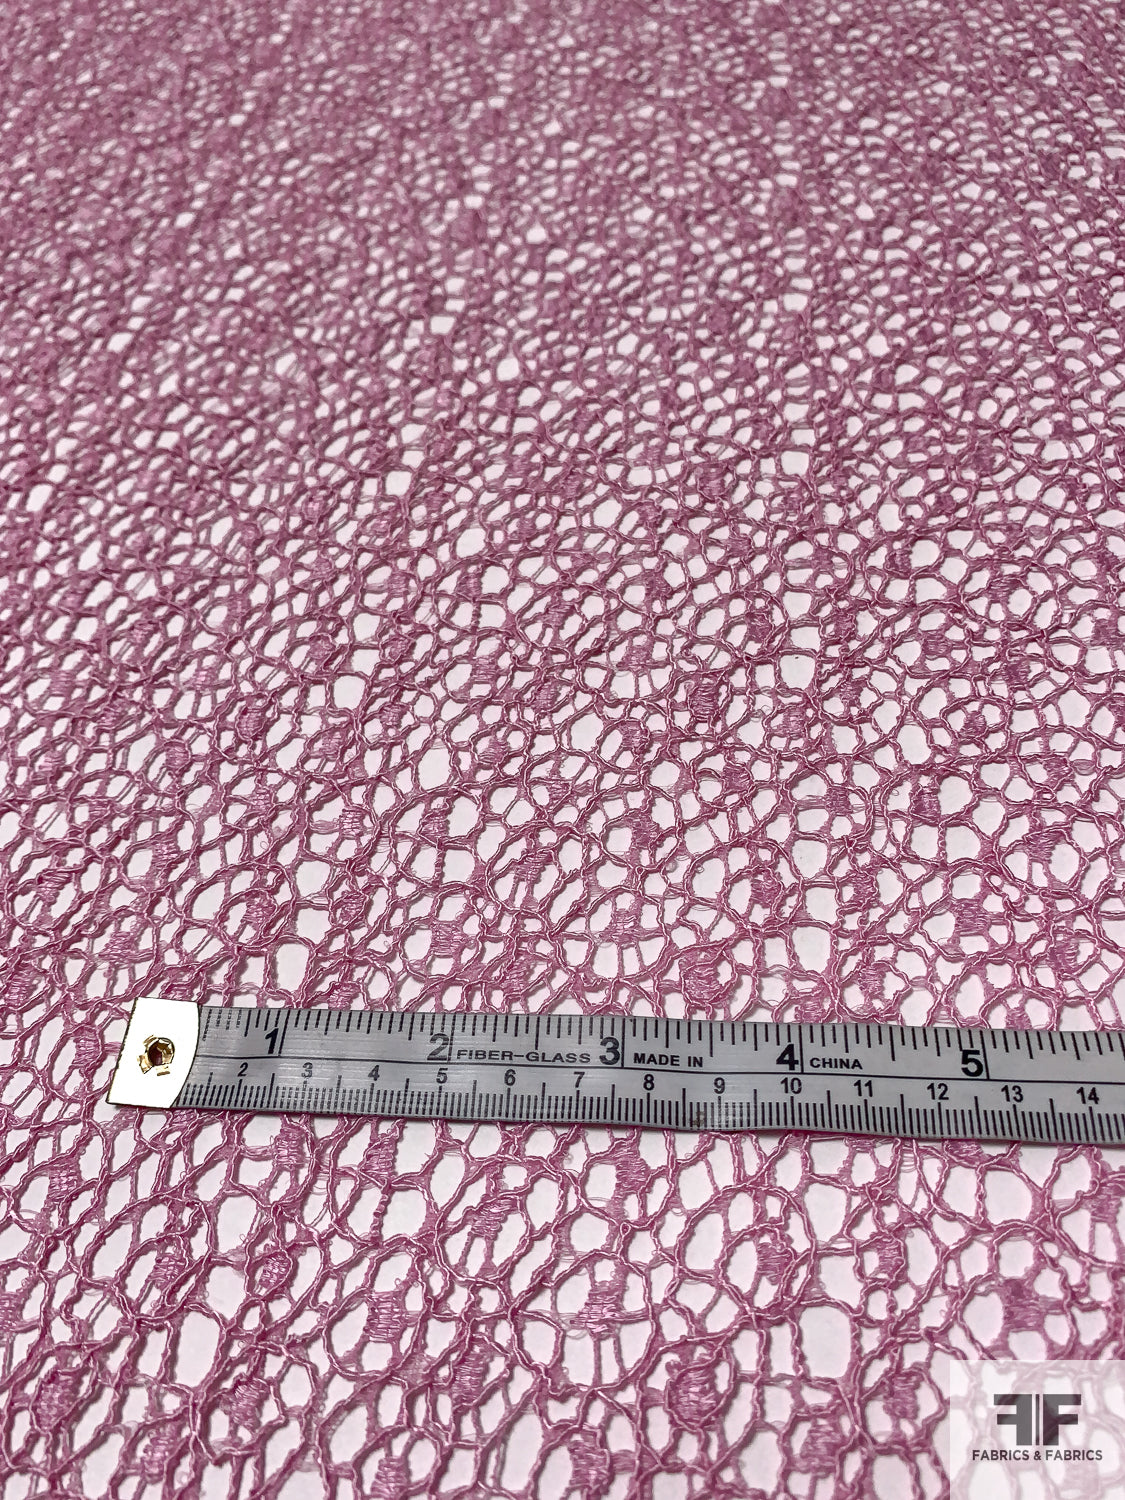 Italian Open-Weave Soft Lace with Fine Cording - Orchid Pink